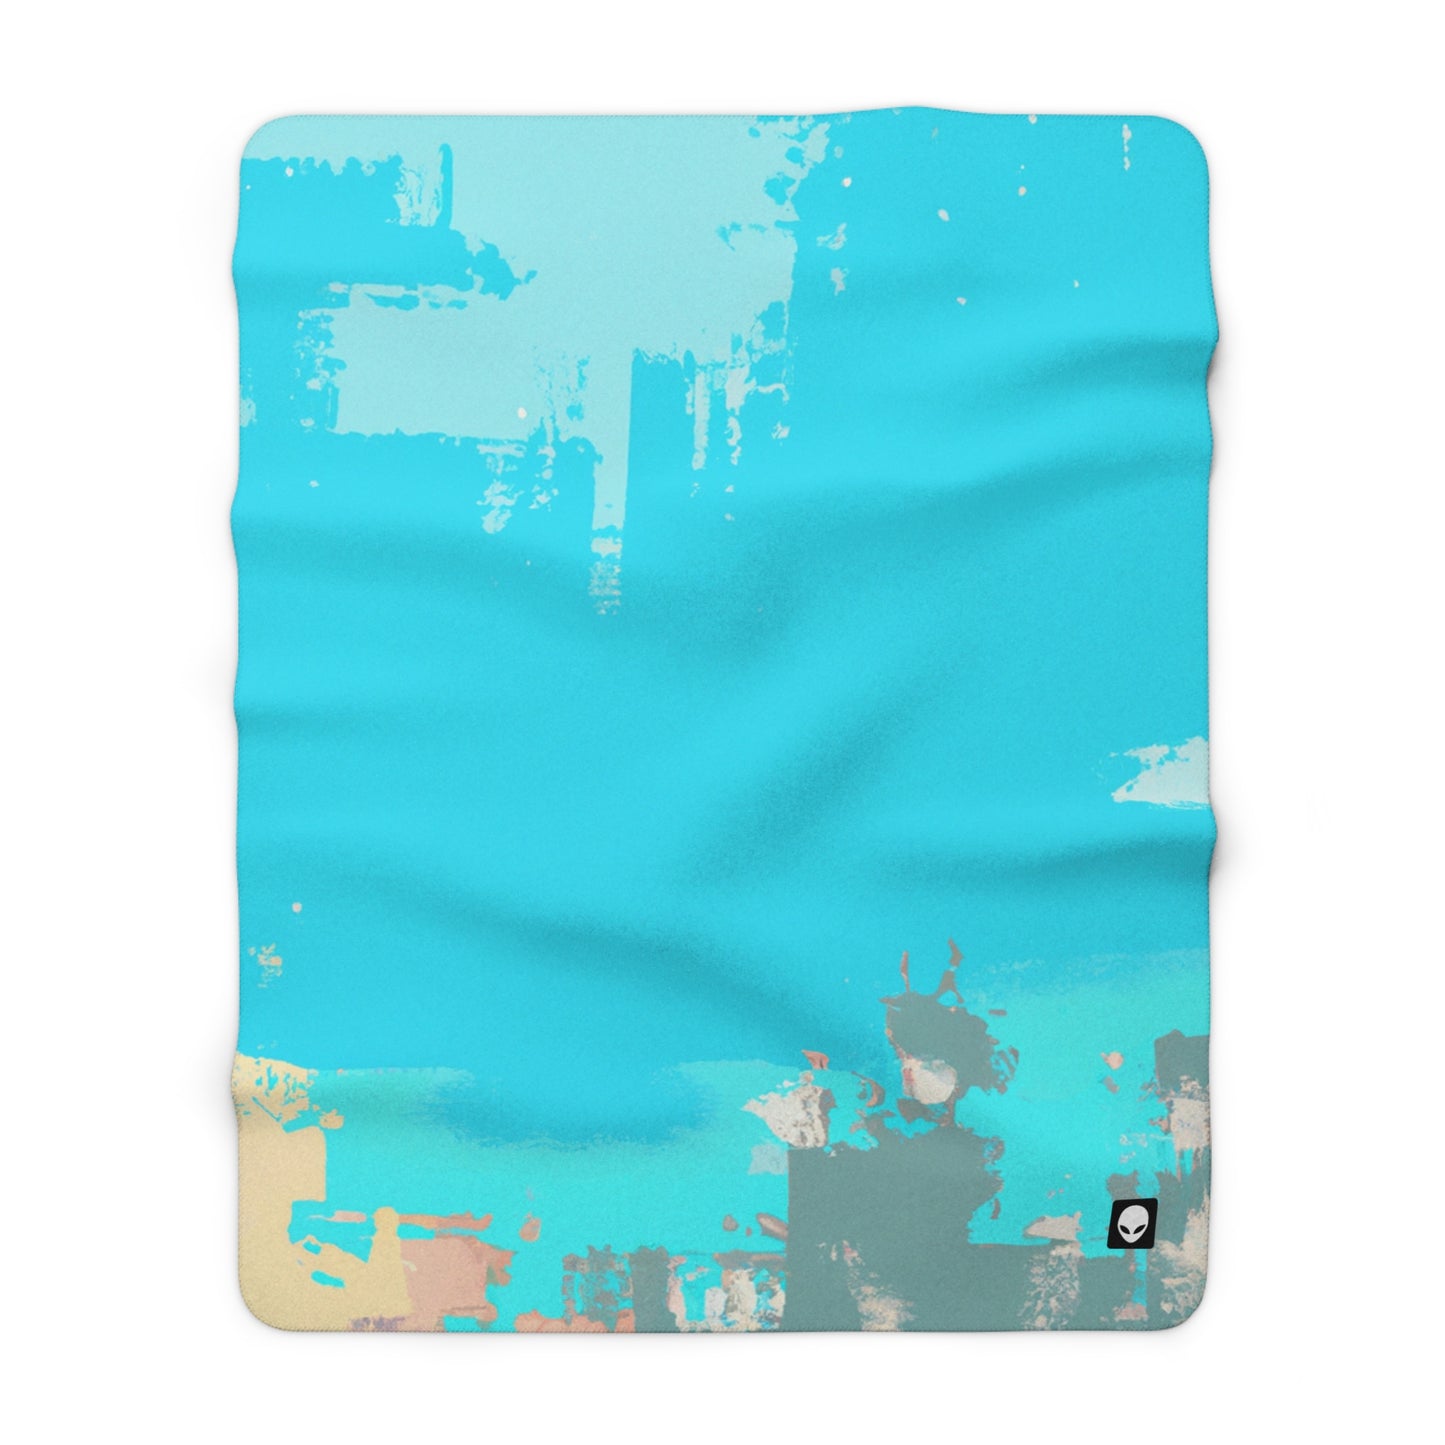 "A Breezy Skyscape: A Combination of Tradition and Modernity" - The Alien Sherpa Fleece Blanket